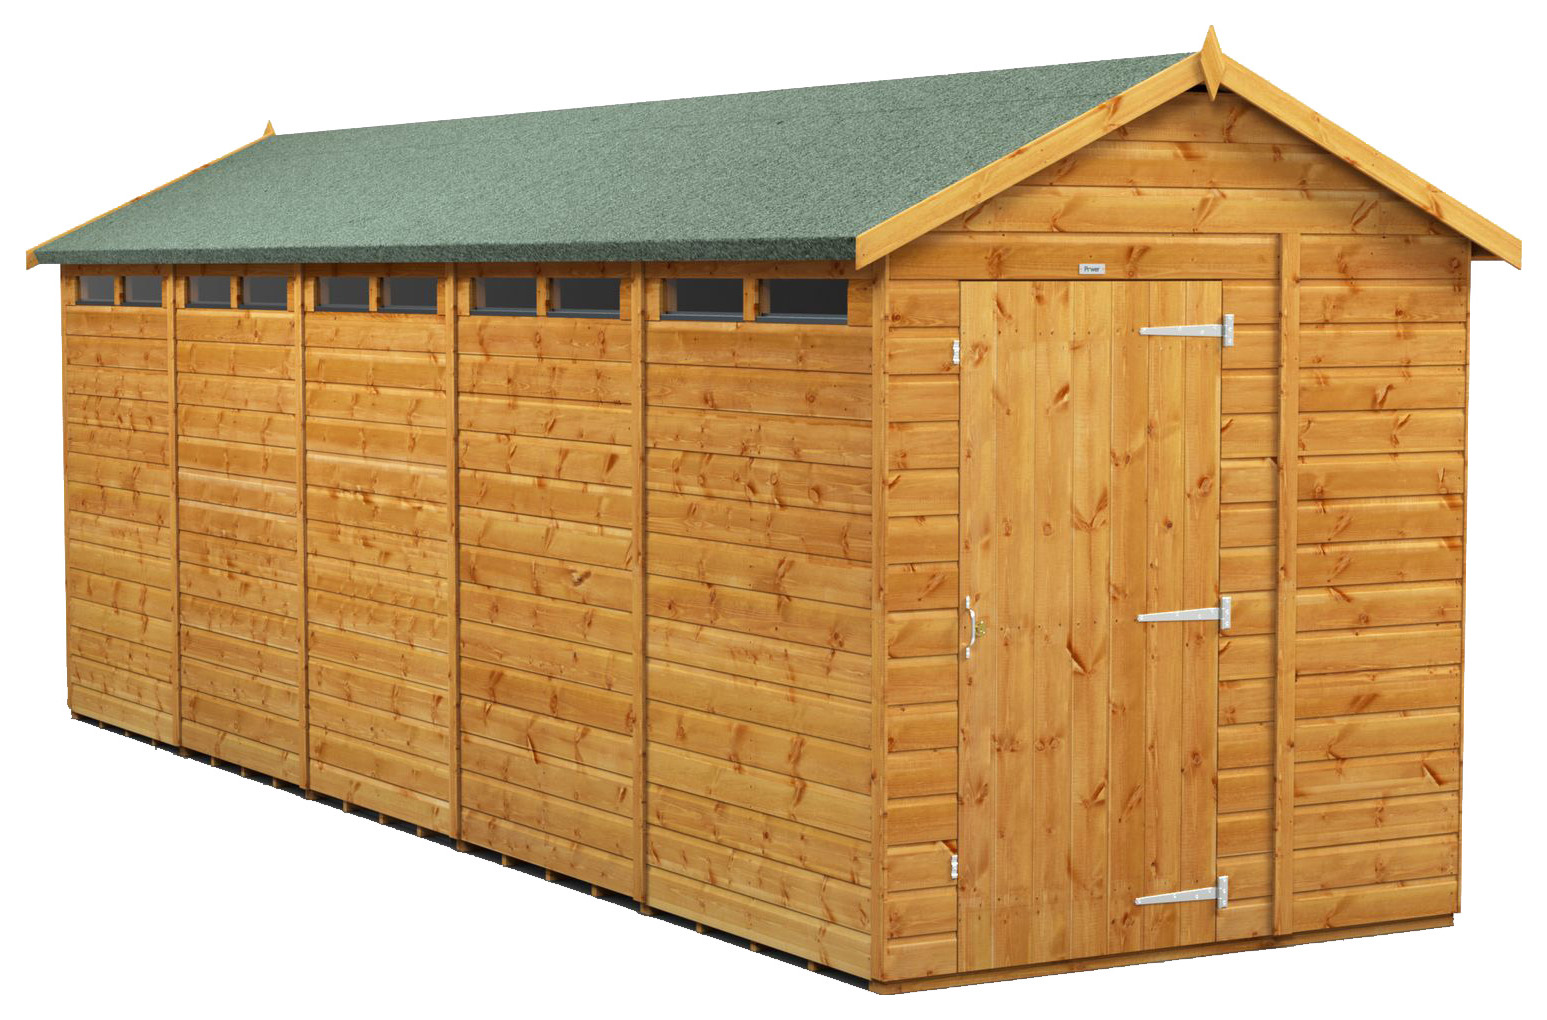 Power Sheds 20 x 6ft Apex Shiplap Dip Treated Security Shed